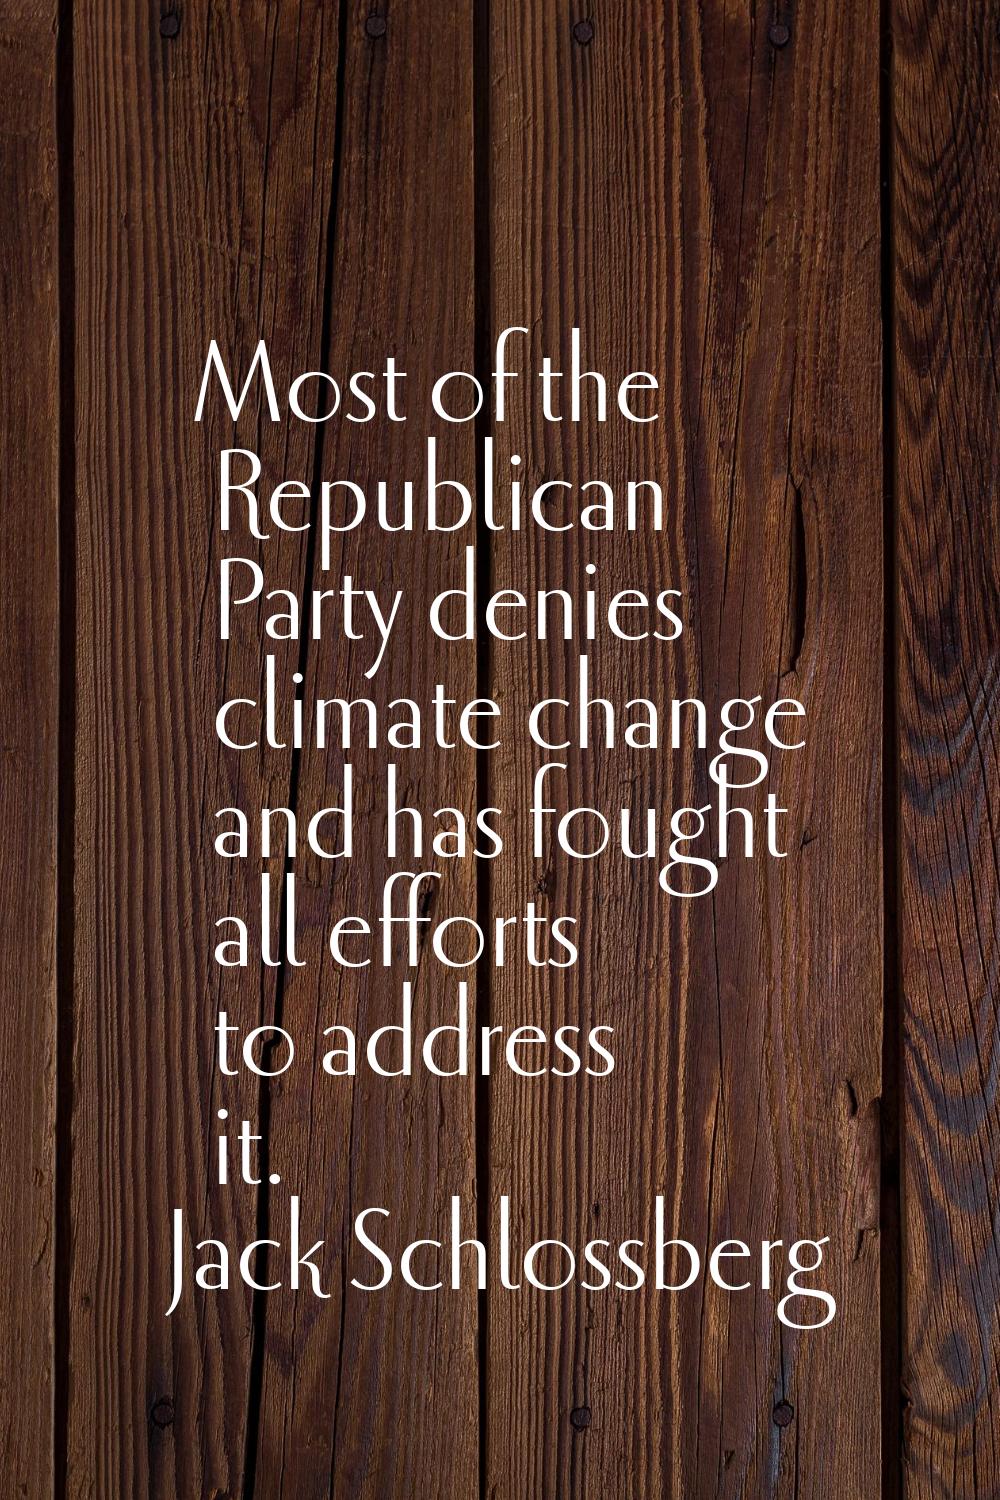 Most of the Republican Party denies climate change and has fought all efforts to address it.